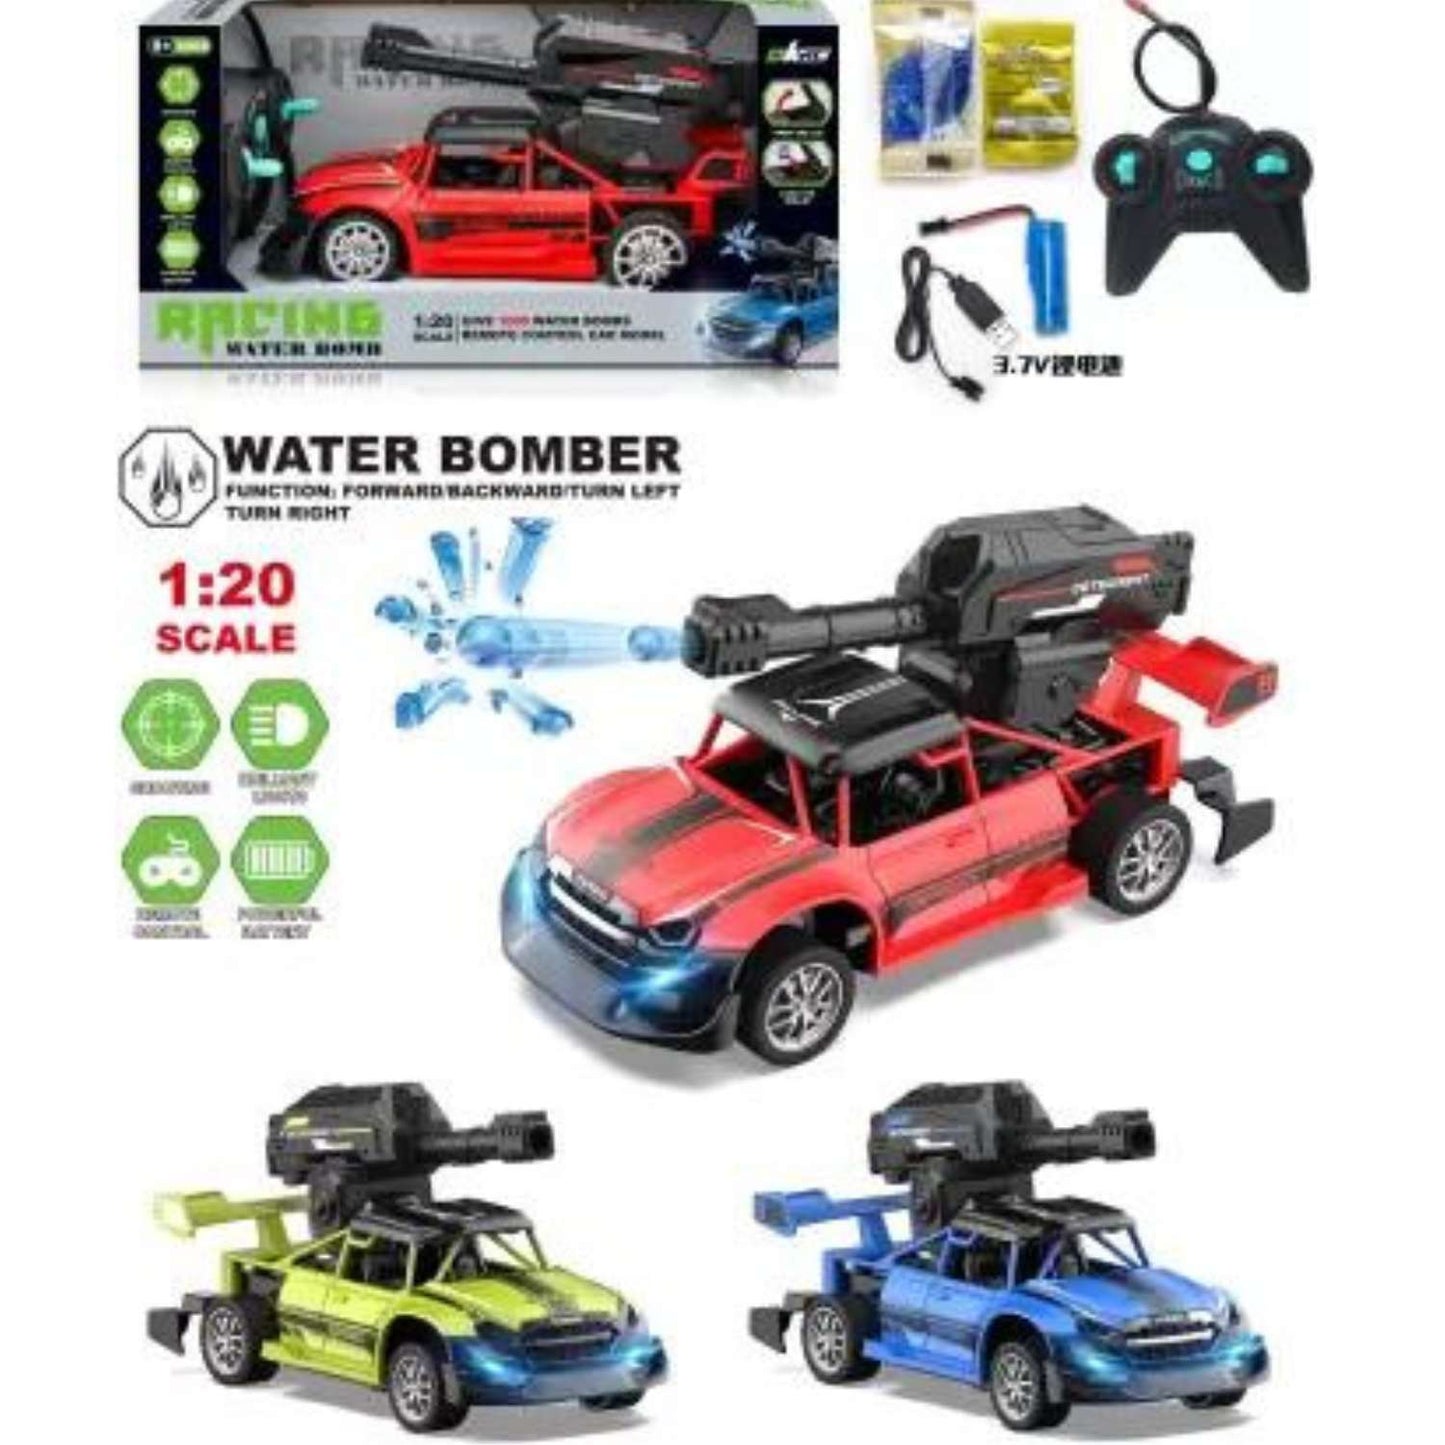 MM TOYS 2-in-1 Water Bomb RC Car, Model 1:20, Fun & Interactive, 5+ Years, LED Lights